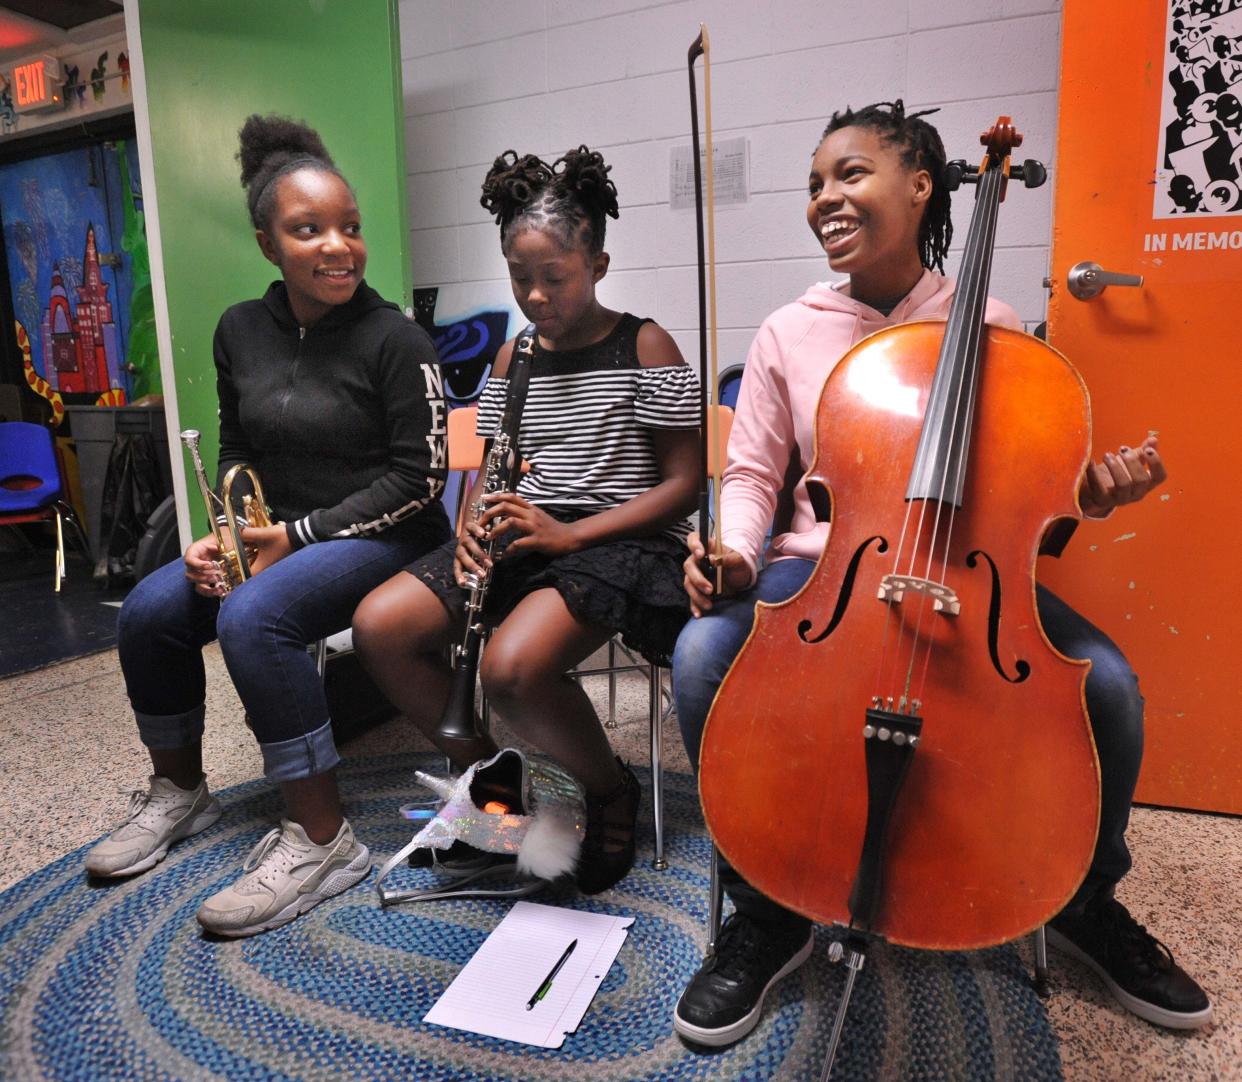 Trumpet player Jordyn Sinclair, from left, and clarinet player Marlee Glover listen as cello player Jaida Ings talks about music at the Don't Miss a Beat community center in 2018. The University of North Florida School of Music provides student mentors to teach children about music and art.